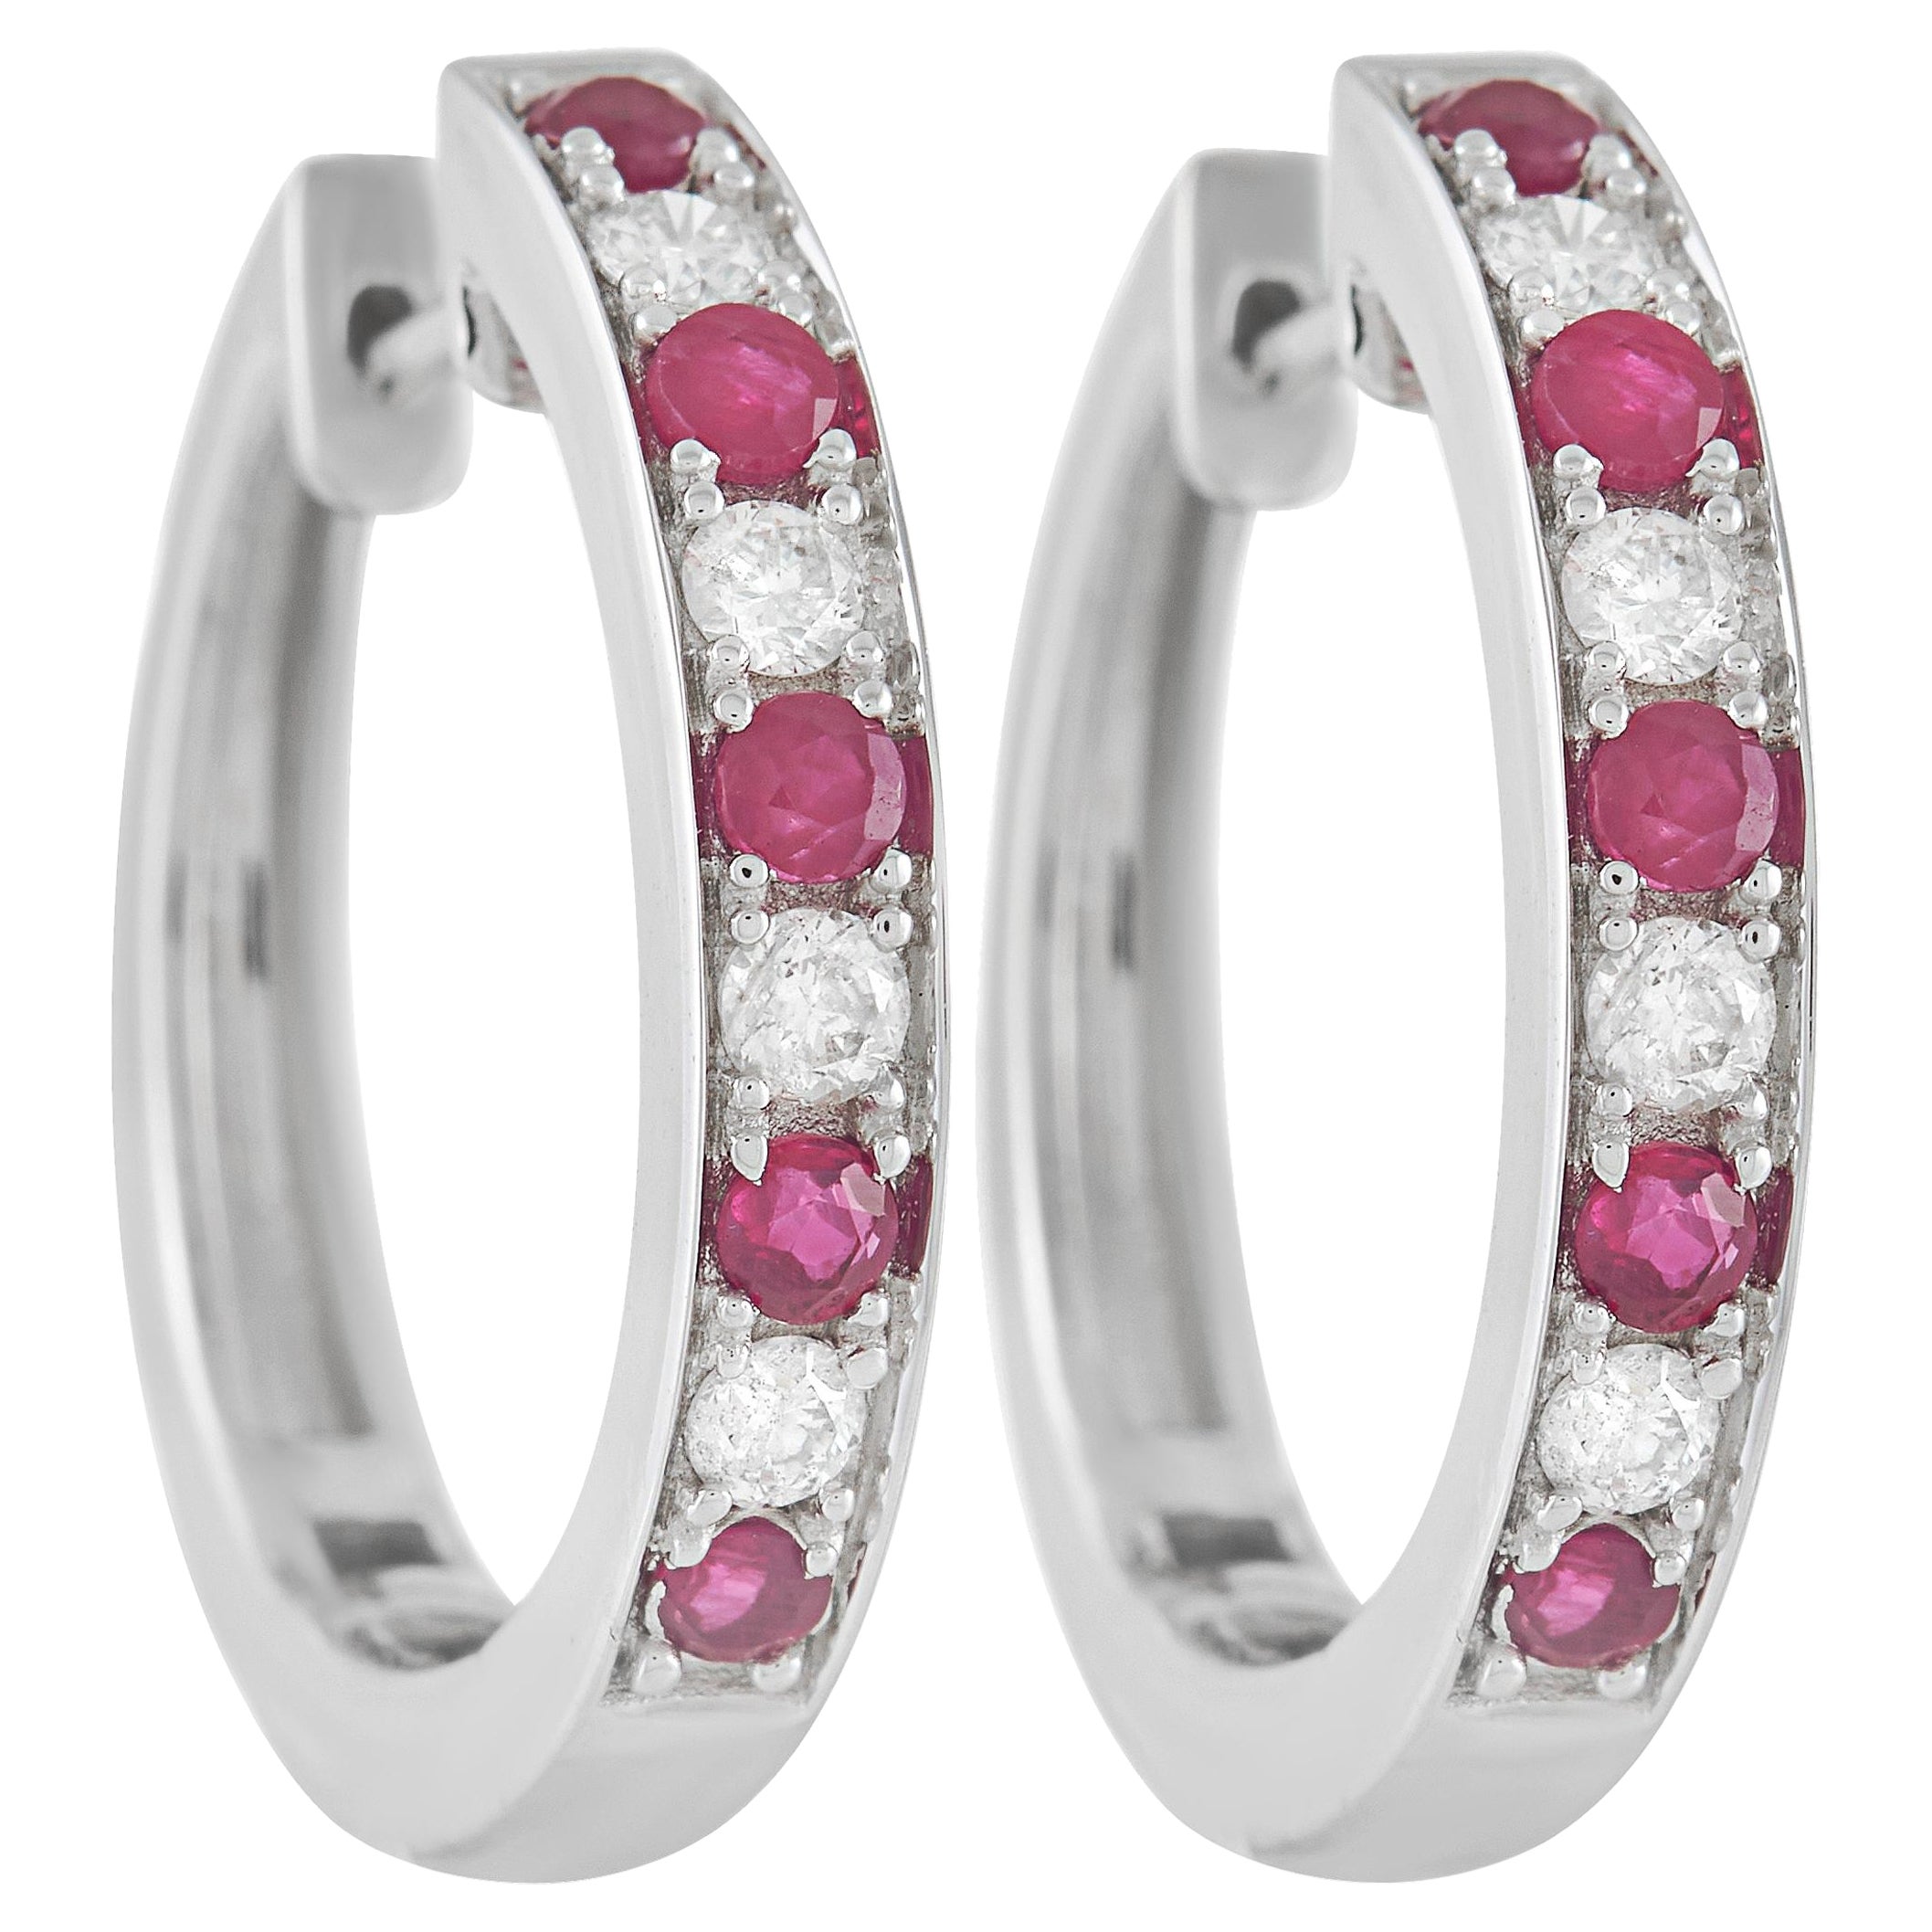 LB Exclusive 14K White Gold 0.25 Ct Diamond and 0.42 Ct Ruby Hoop Earrings For Sale